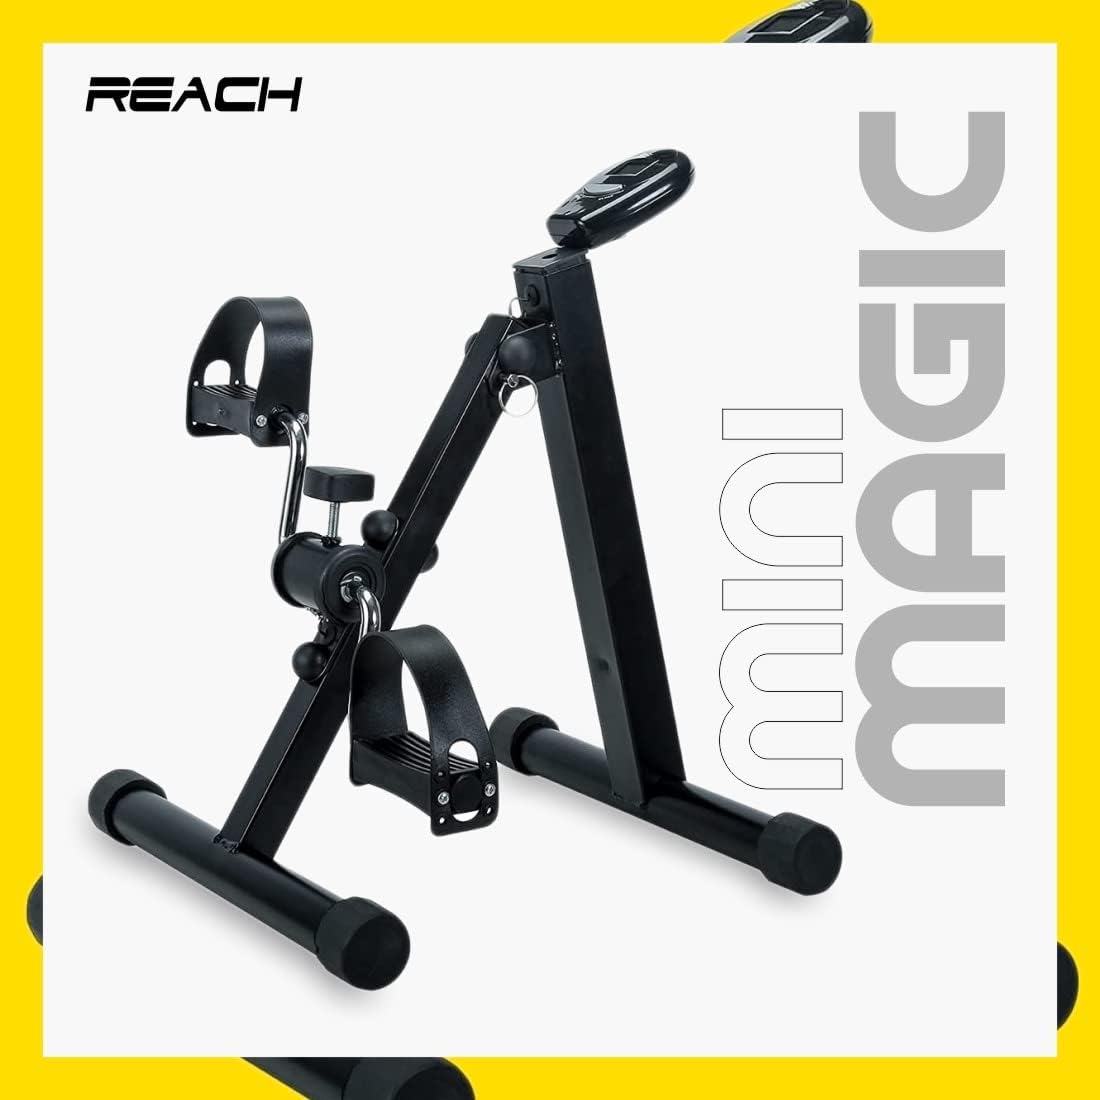 ELEV8 by Reach Mini Cycle Pedal Exerciser with Adjustable Resistance and Digital Display - Suitable for Light Exercise of Legs & Arms, and Physiotherapy at Home